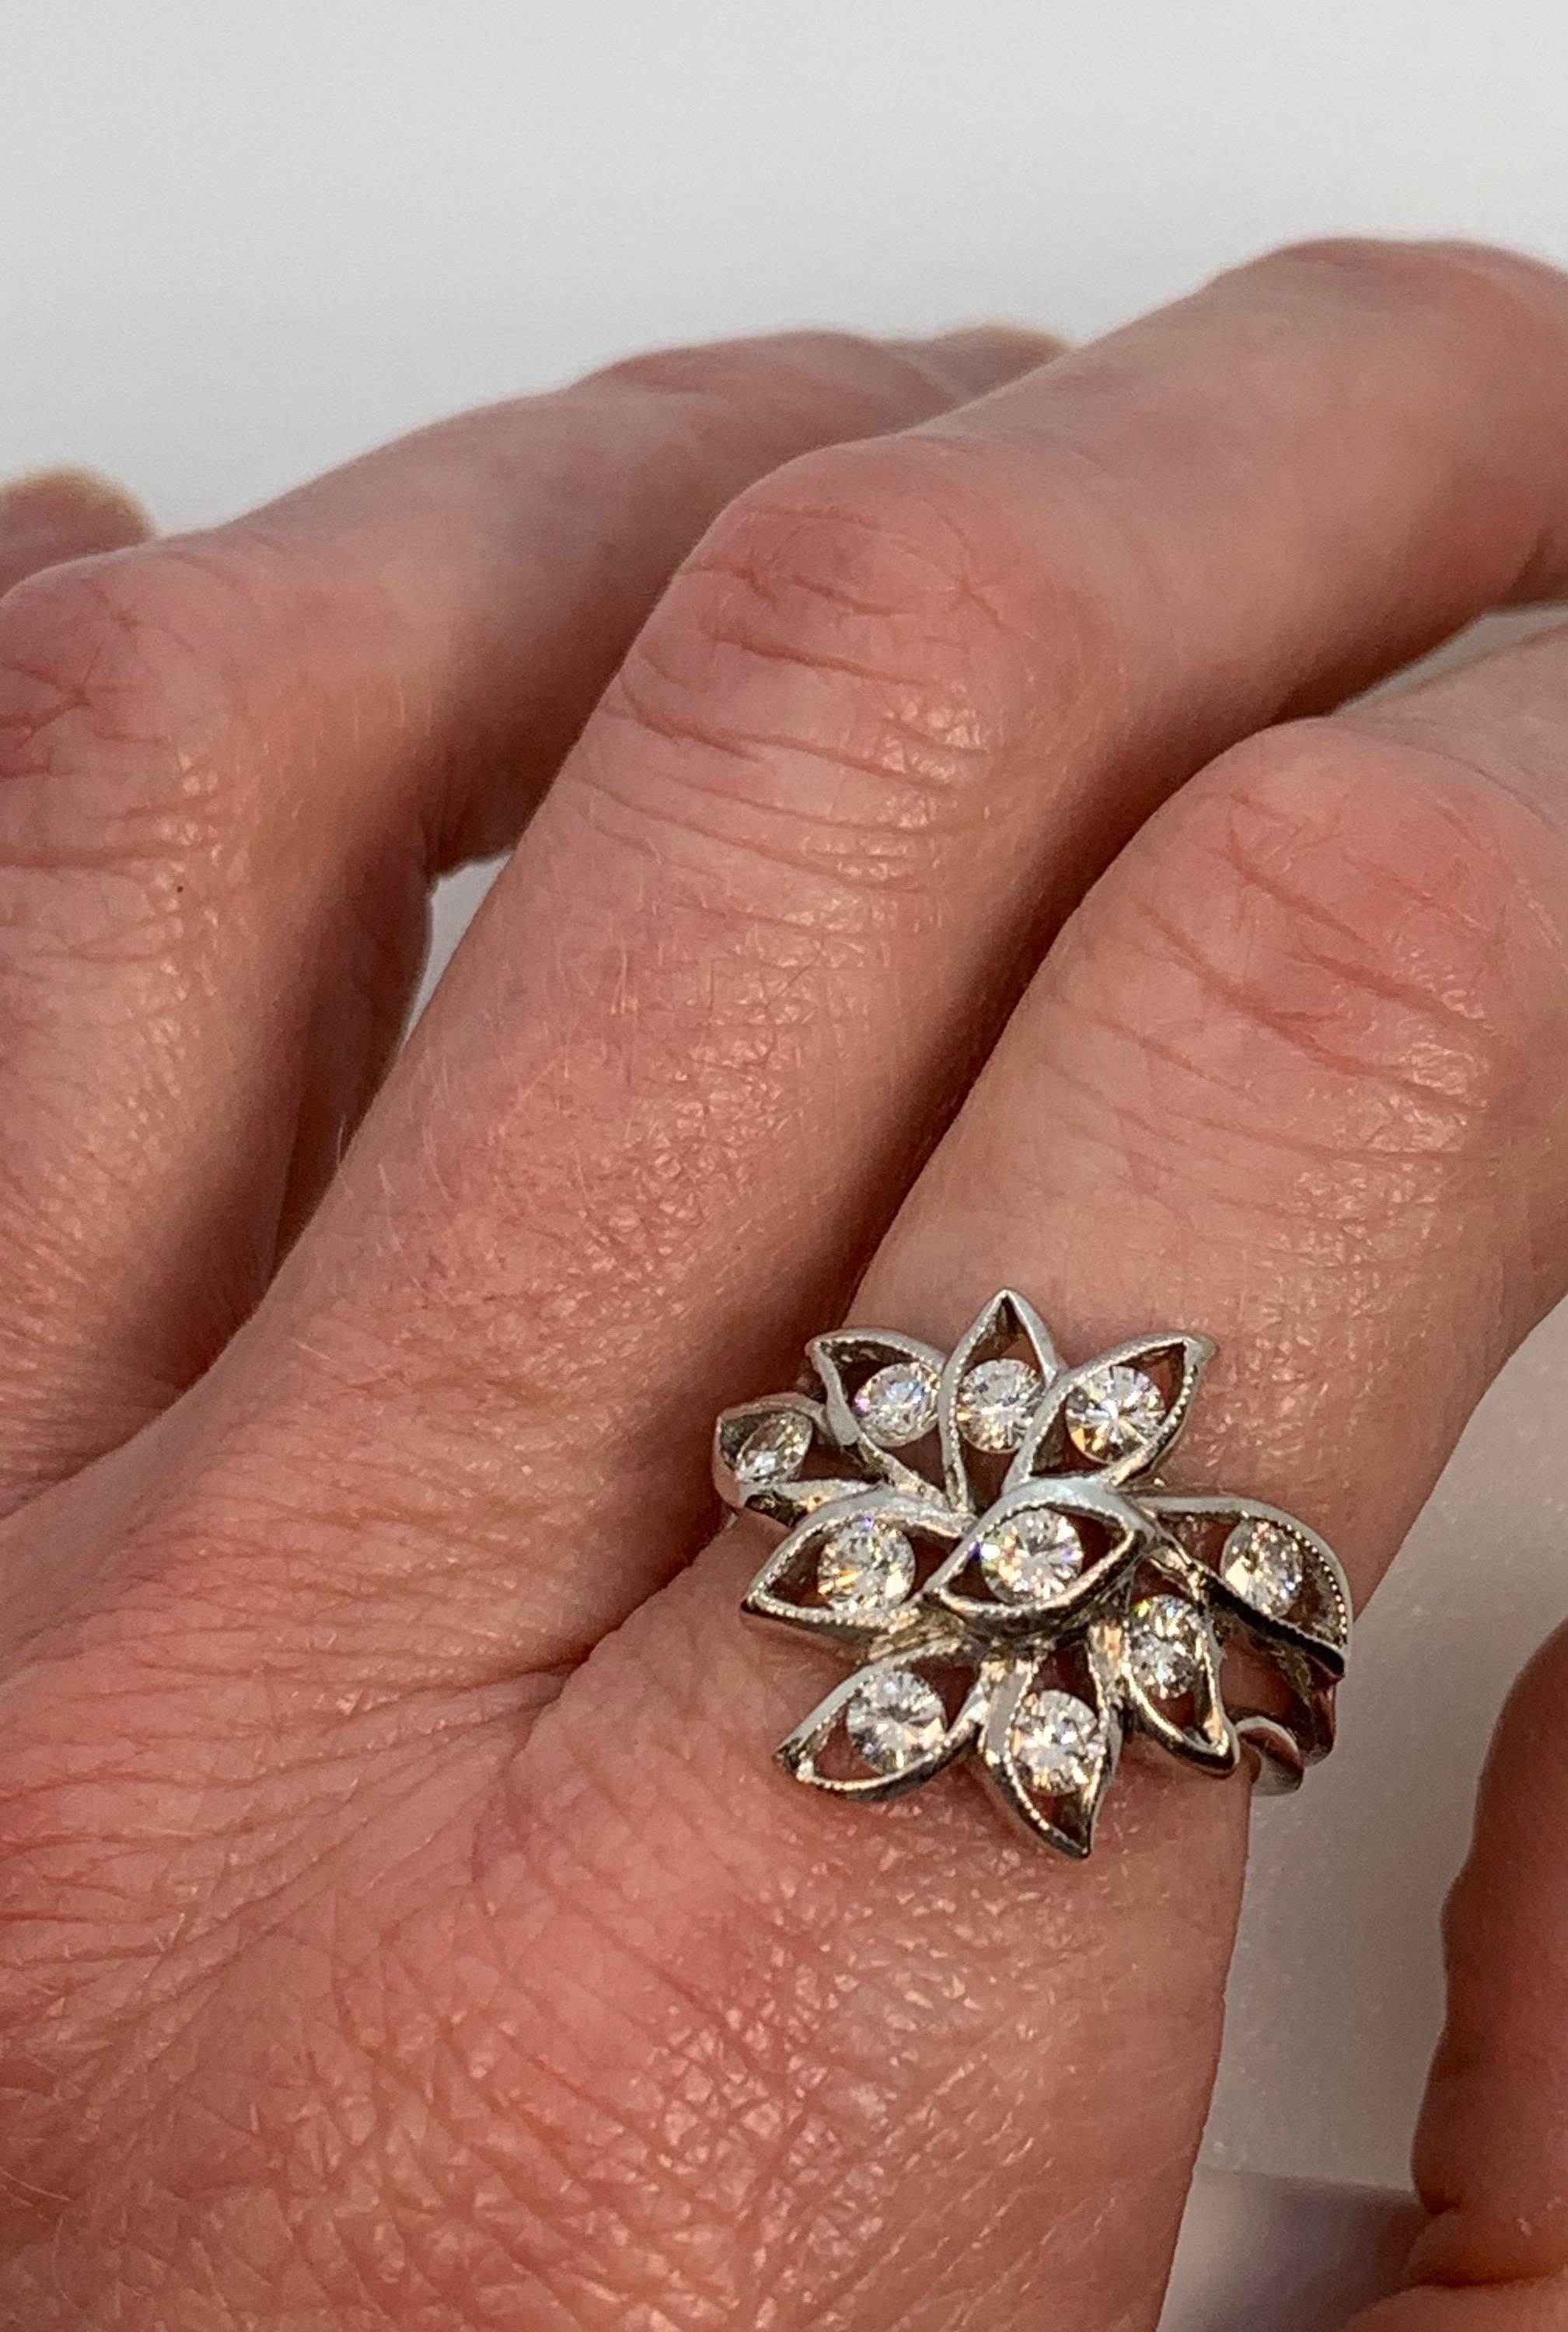 This one-of-a-kind ring was made by Eytan Brandes for a customer who traded it in a few years later for something bigger (of course).  It features a loose, leafy foliate design, with each petal or leaf holding a diamond.  The edges of each petal